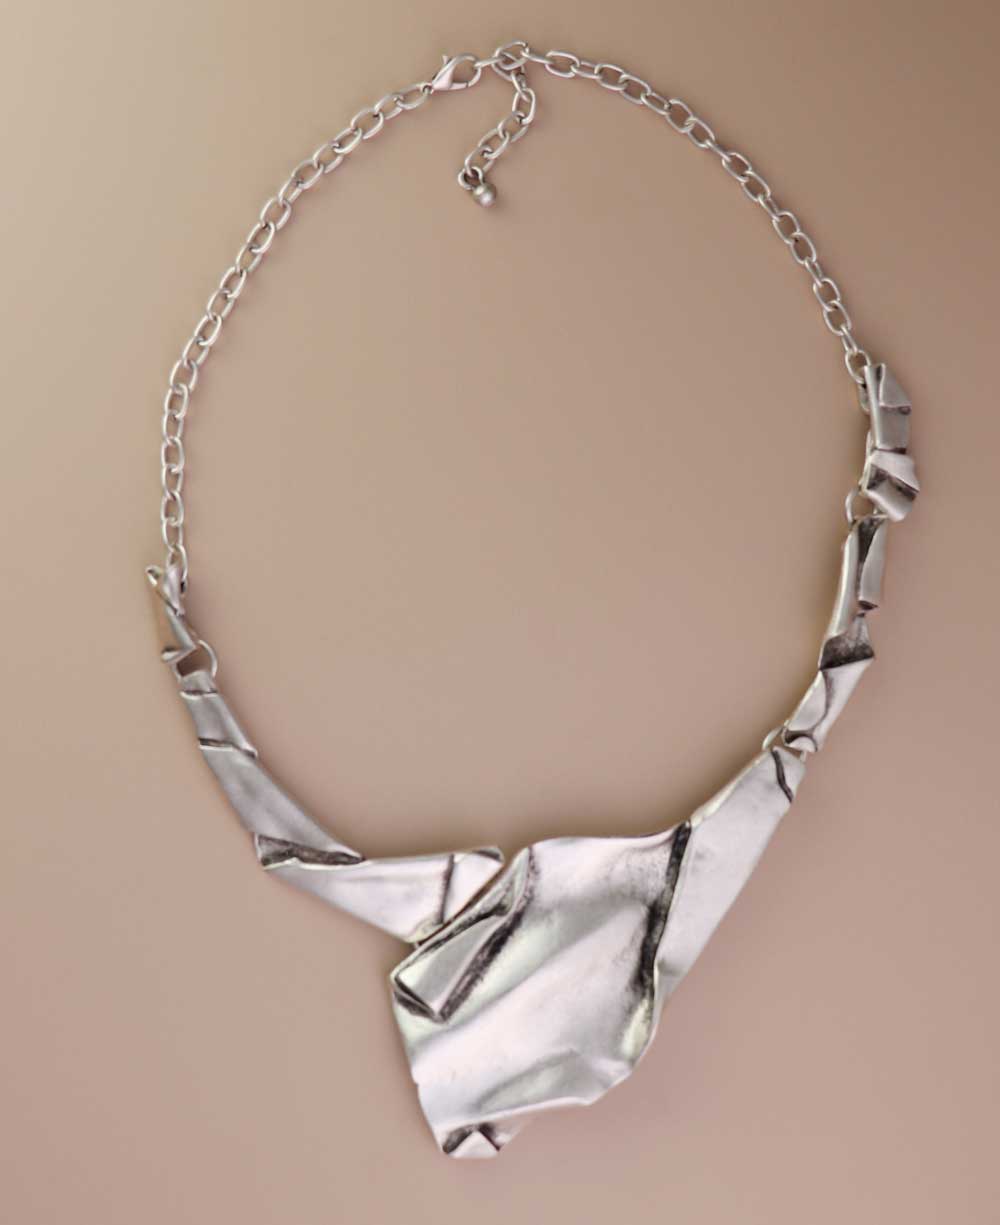 Abstract art fashion necklace